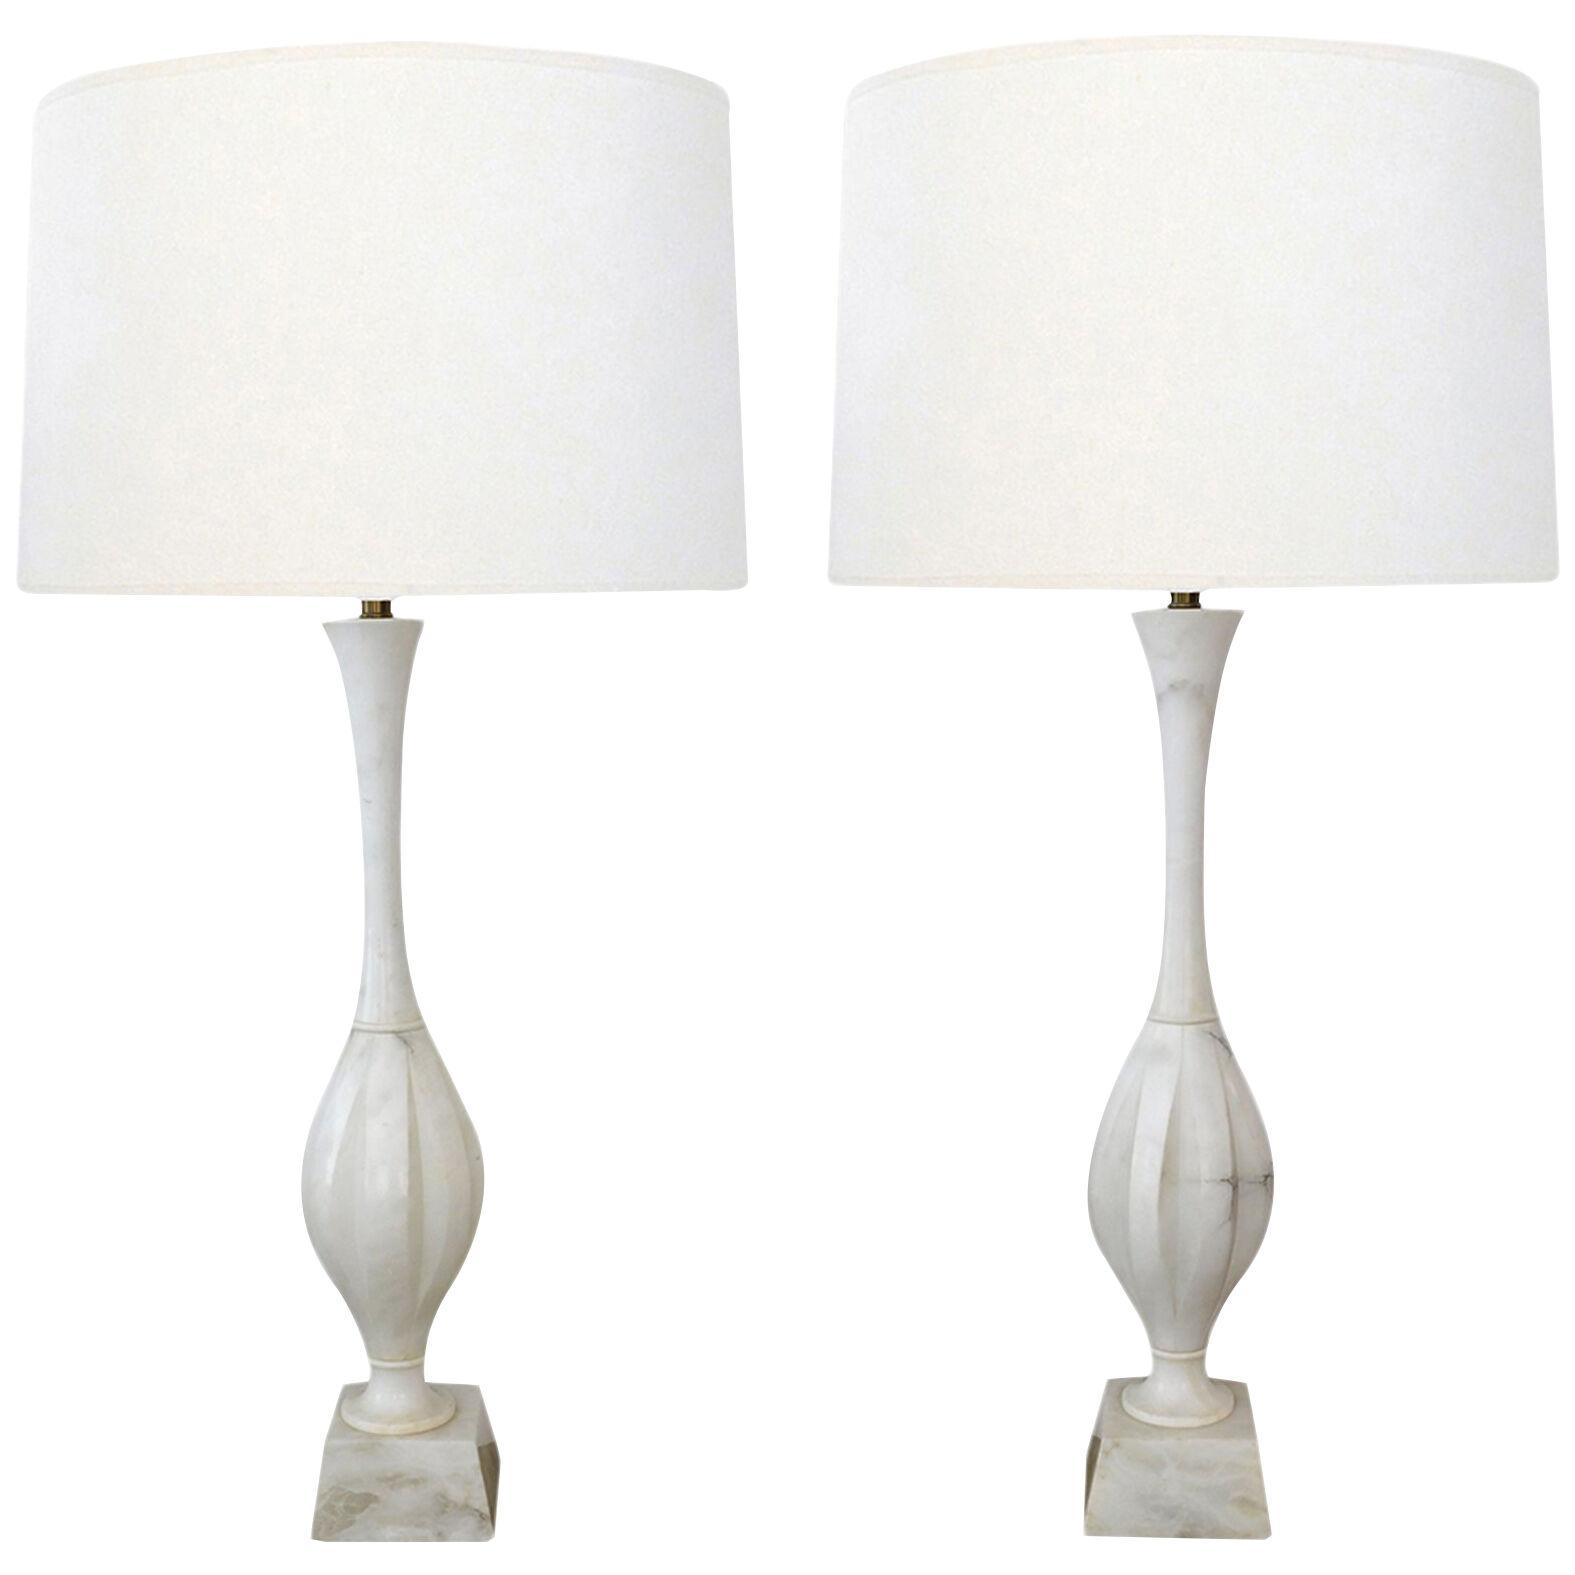 Pair Of Italian 1960's Carved Carrera Marble Baluster-Form Lamps.